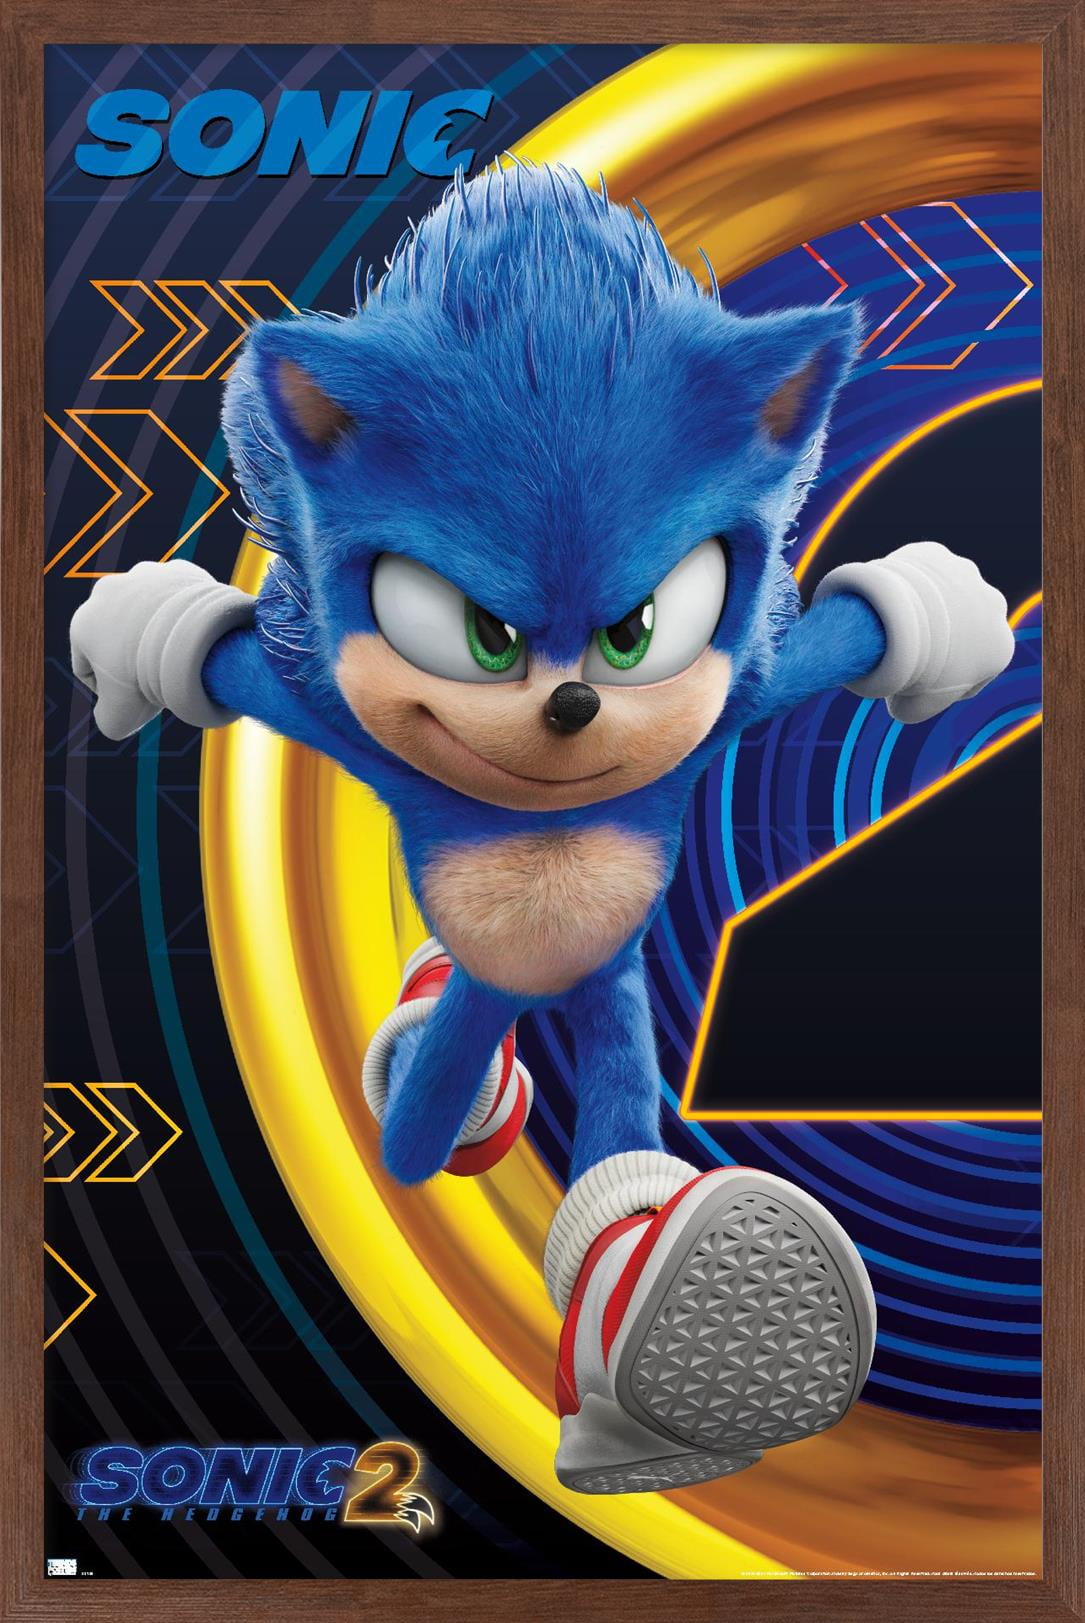 Sonic The Hedgehog 2 - Sonic Wall Poster, 14.725 x 22.375